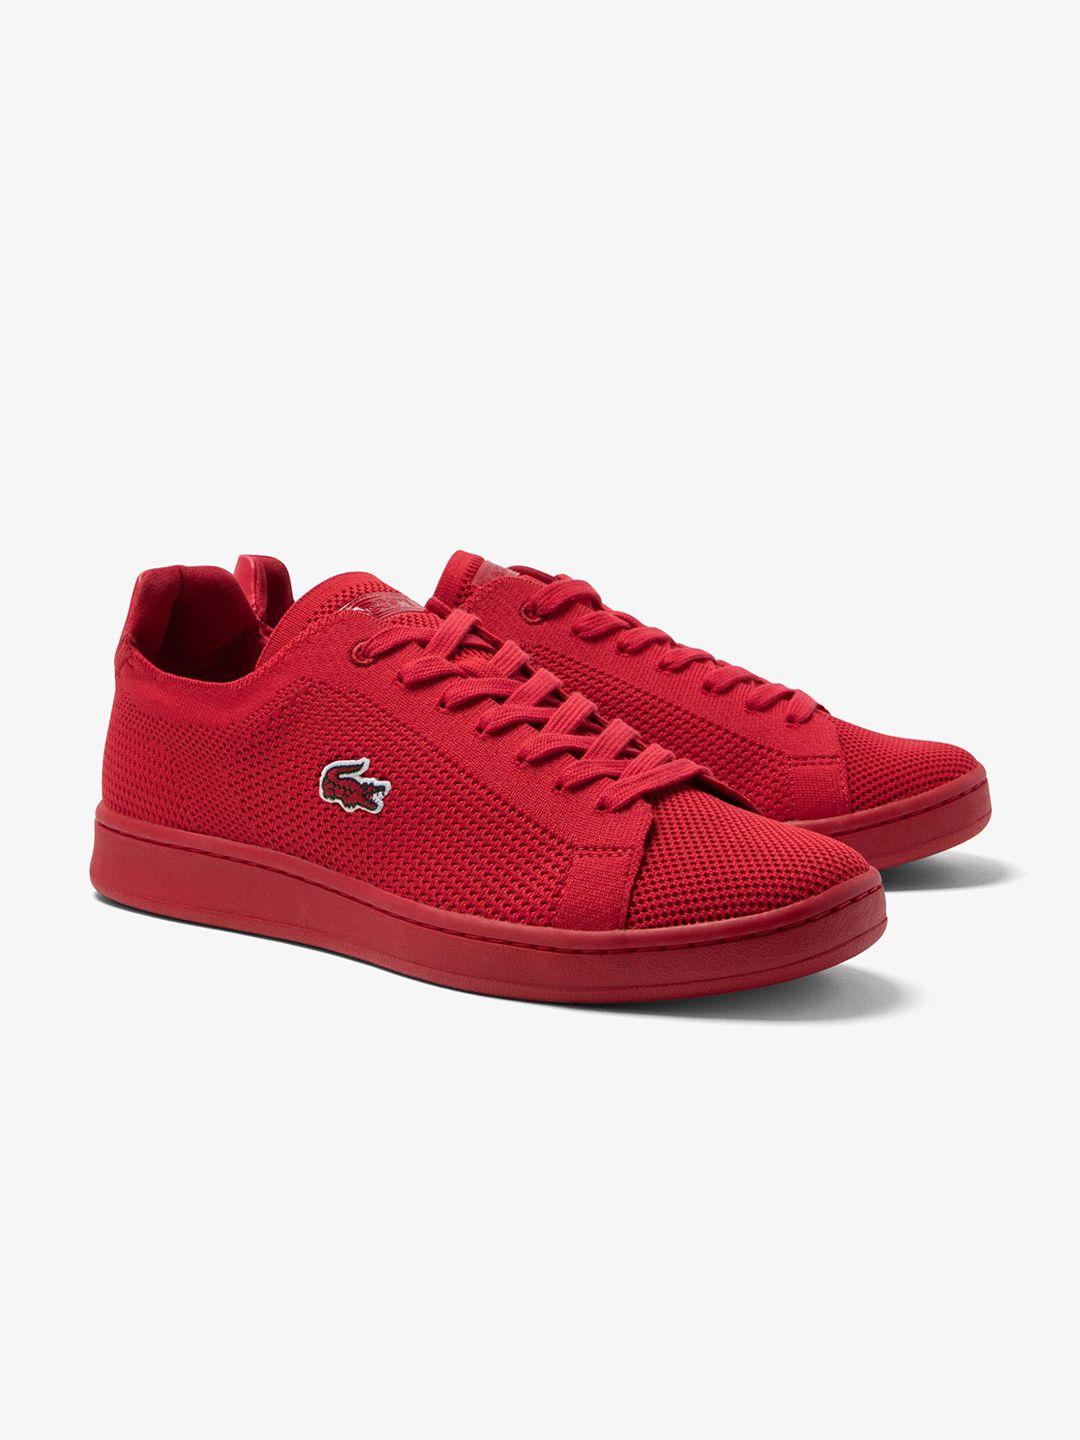 lacoste-men-red-training-or-gym-non-marking-shoes